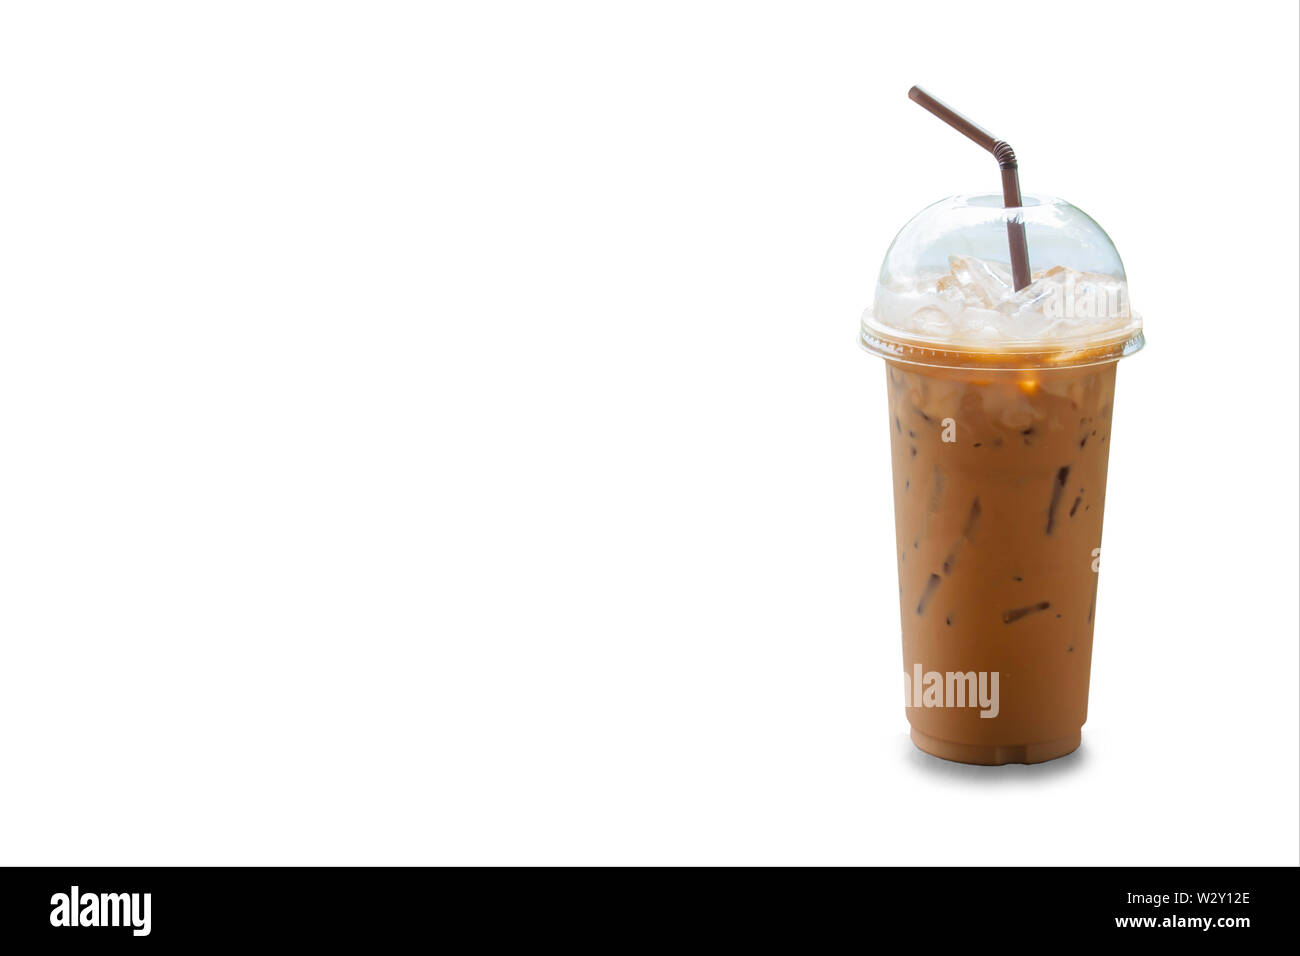 https://c8.alamy.com/comp/W2Y12E/iced-coffee-in-a-plastic-glass-on-a-white-background-with-clipping-path-W2Y12E.jpg